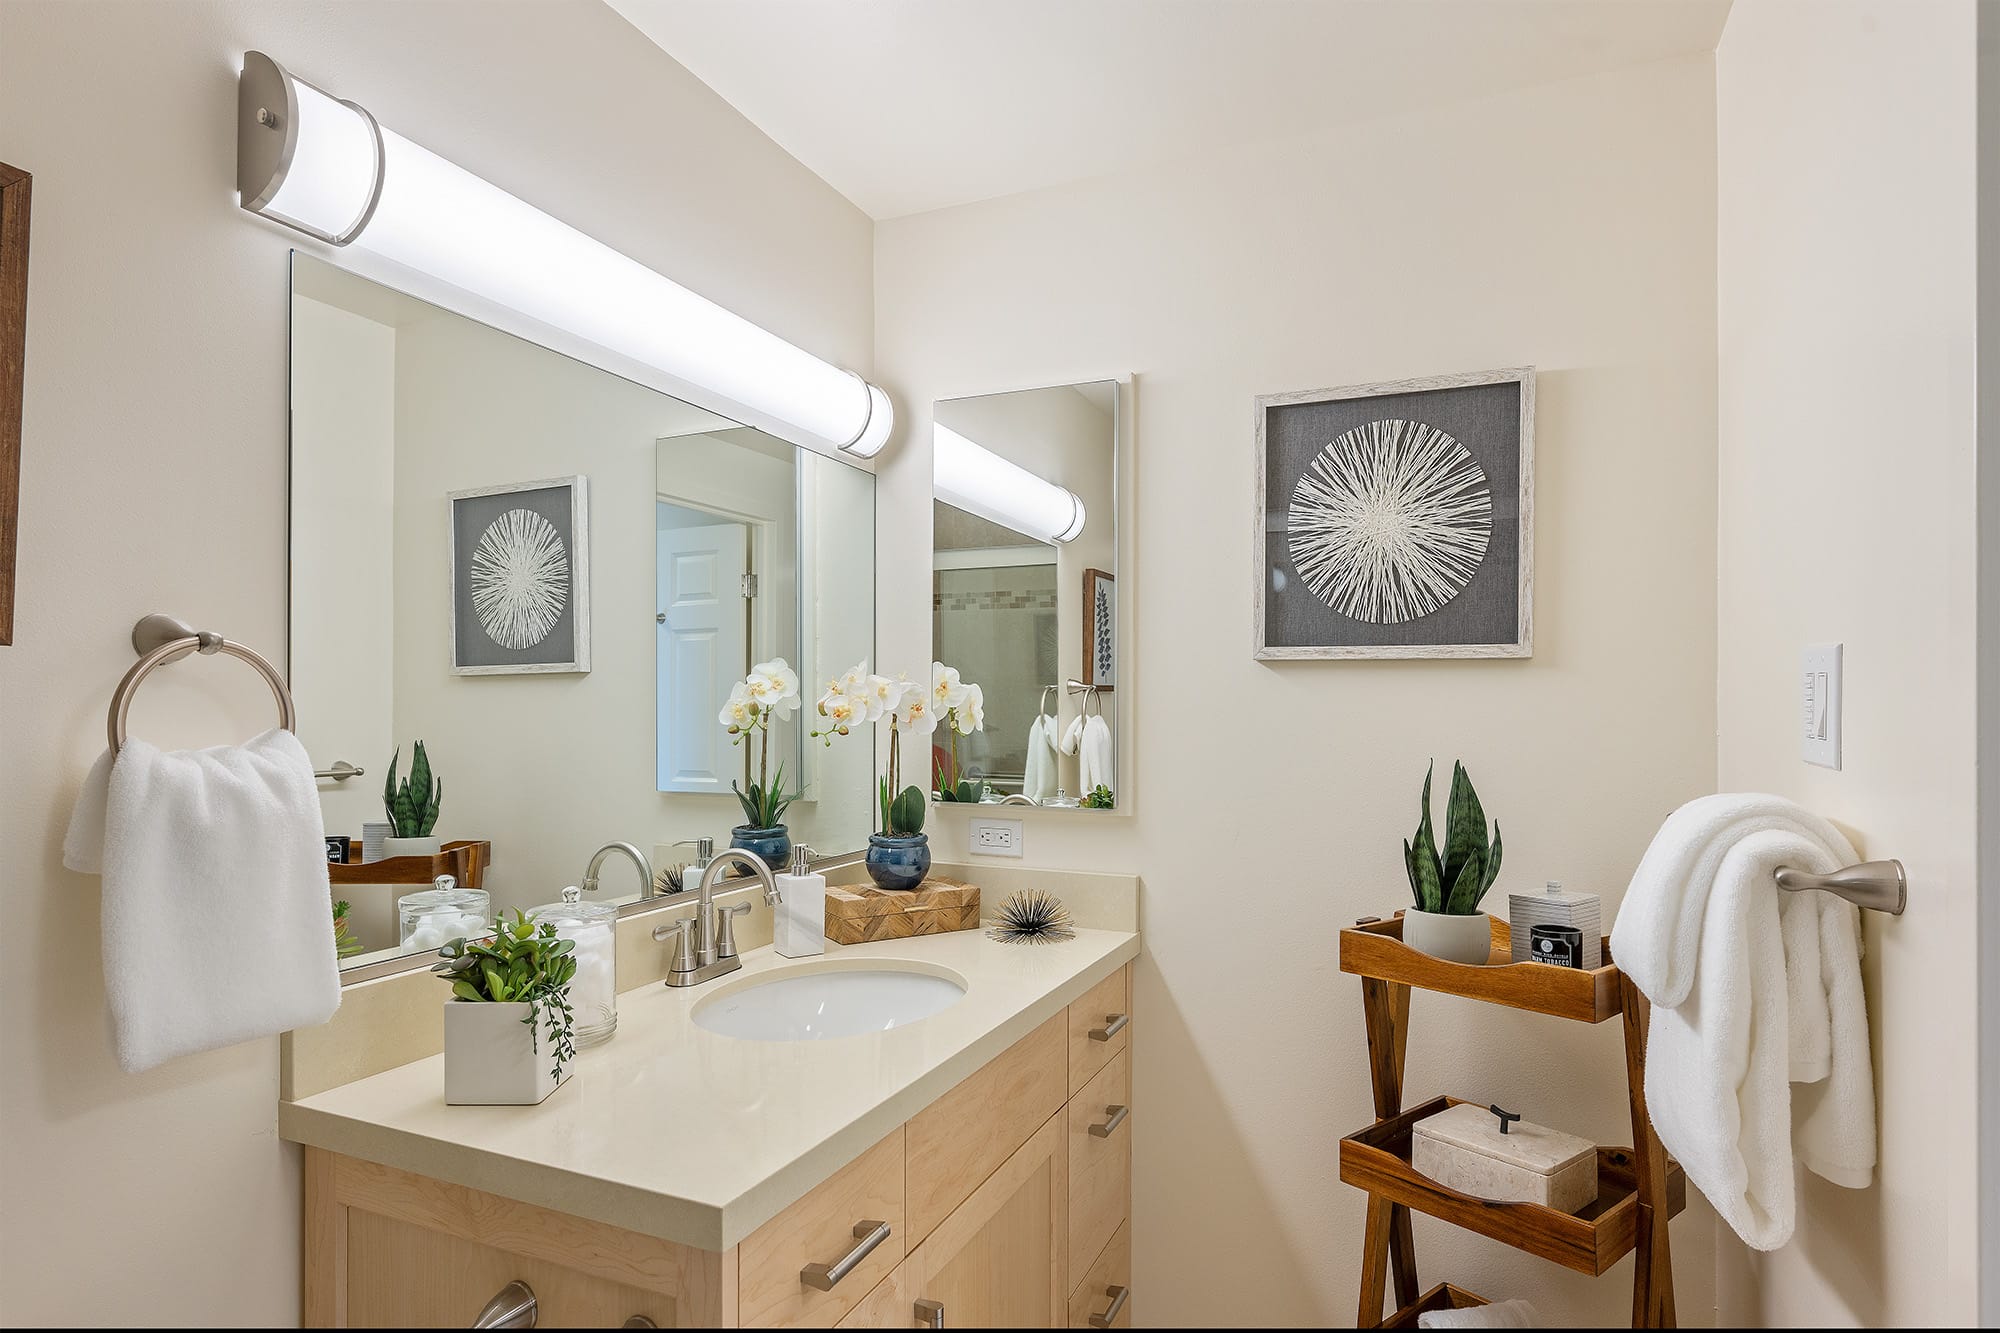 Bathroom in studio apartment with white walls and white countertop.